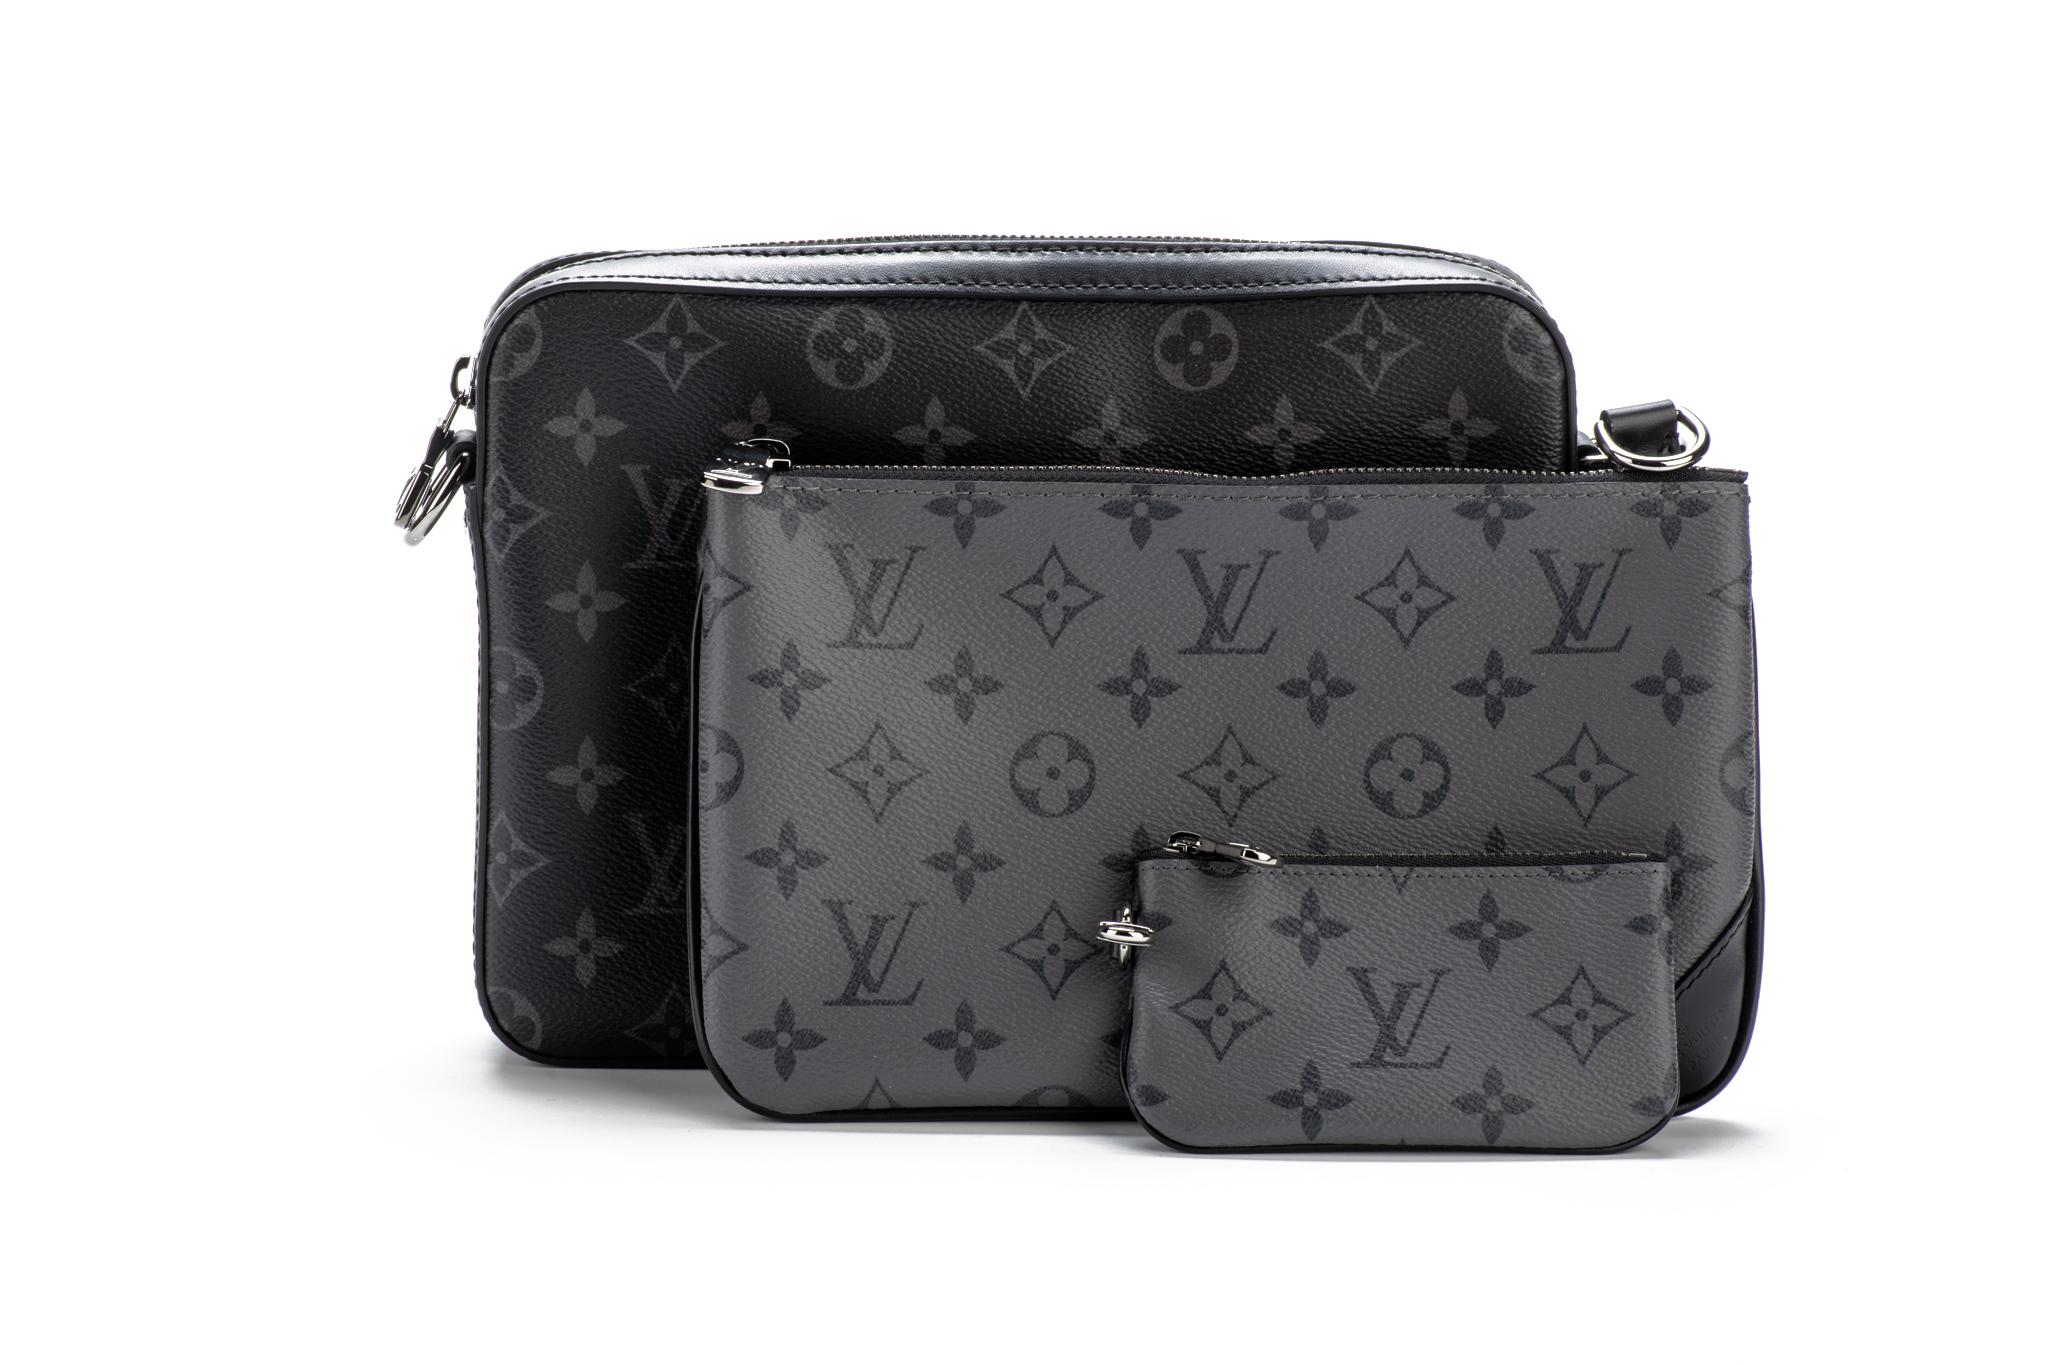 Louis Vuitton hot season ticket multi pochette in coated monogram canvas in black and gray combo. Sold out worldwide. Gentlemen's style. Composed of three detachable parts: cross body, pochette and round coin purse. Adjustable strap. Comes with dust